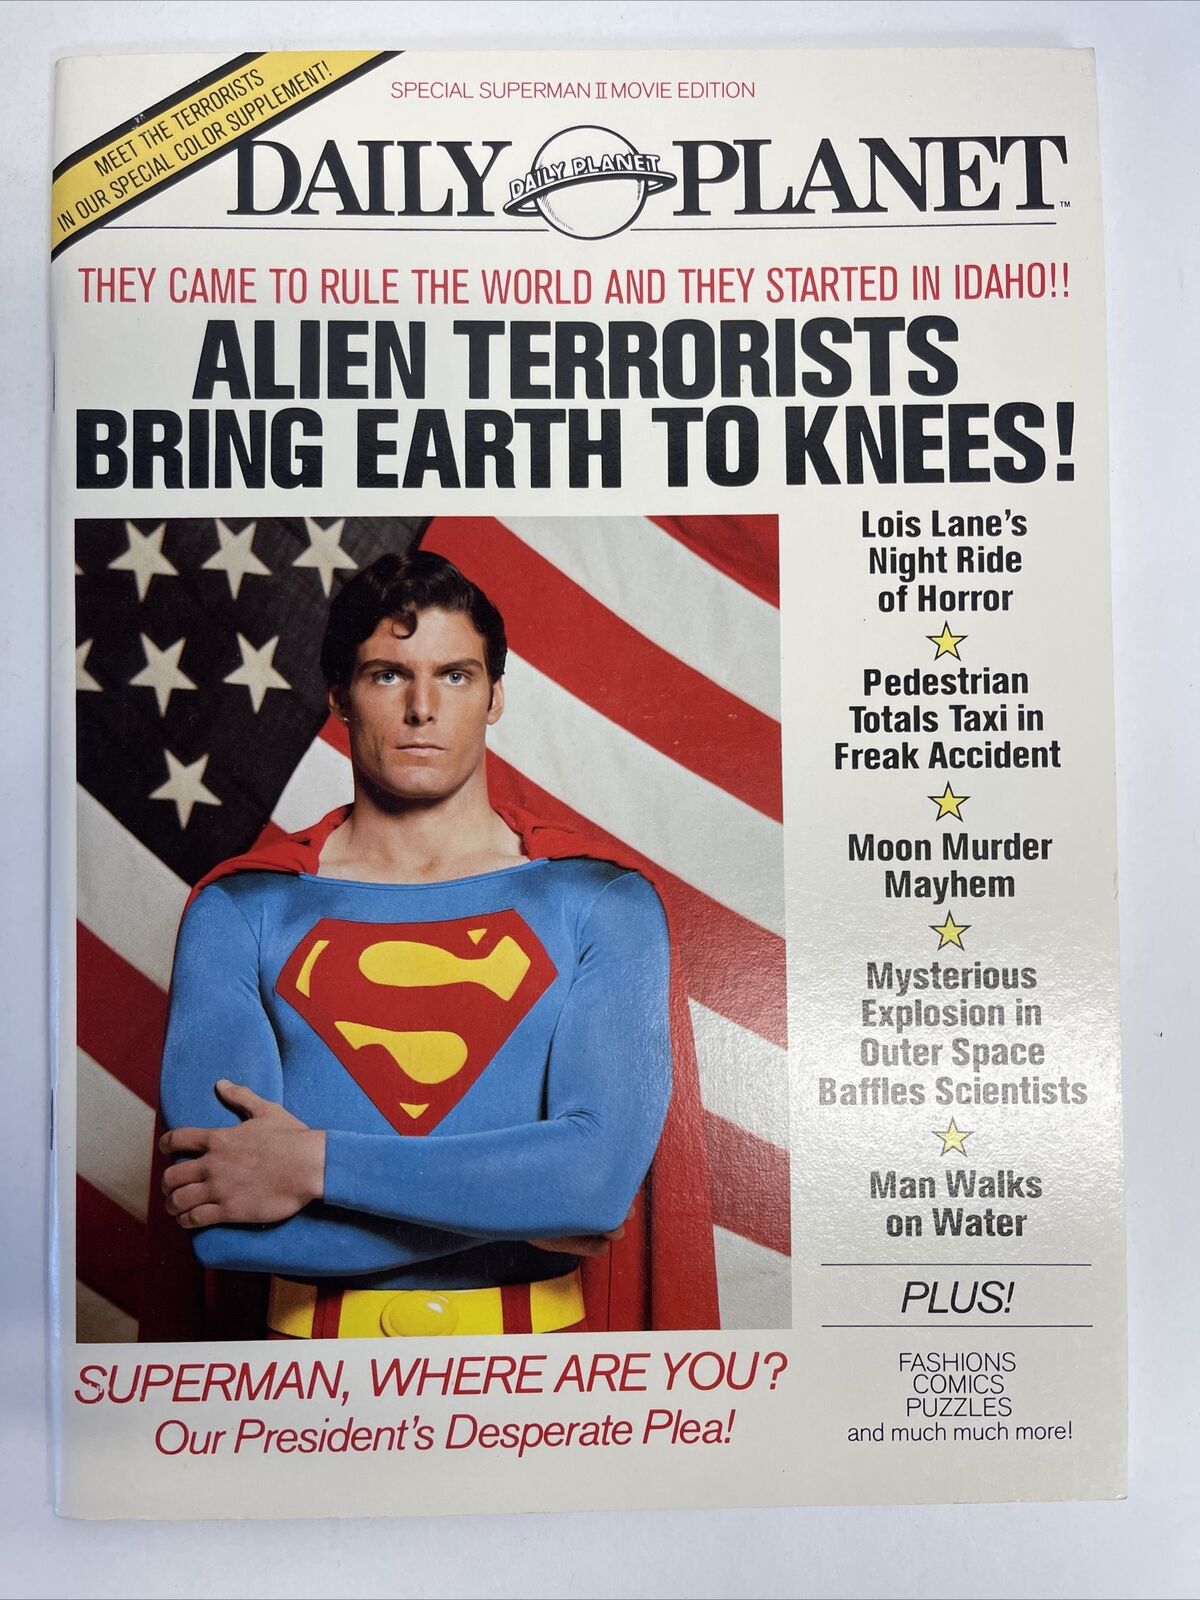 Daily Planet Special Superman II Movie Edition 1981 DC Comics News Magazine WOW